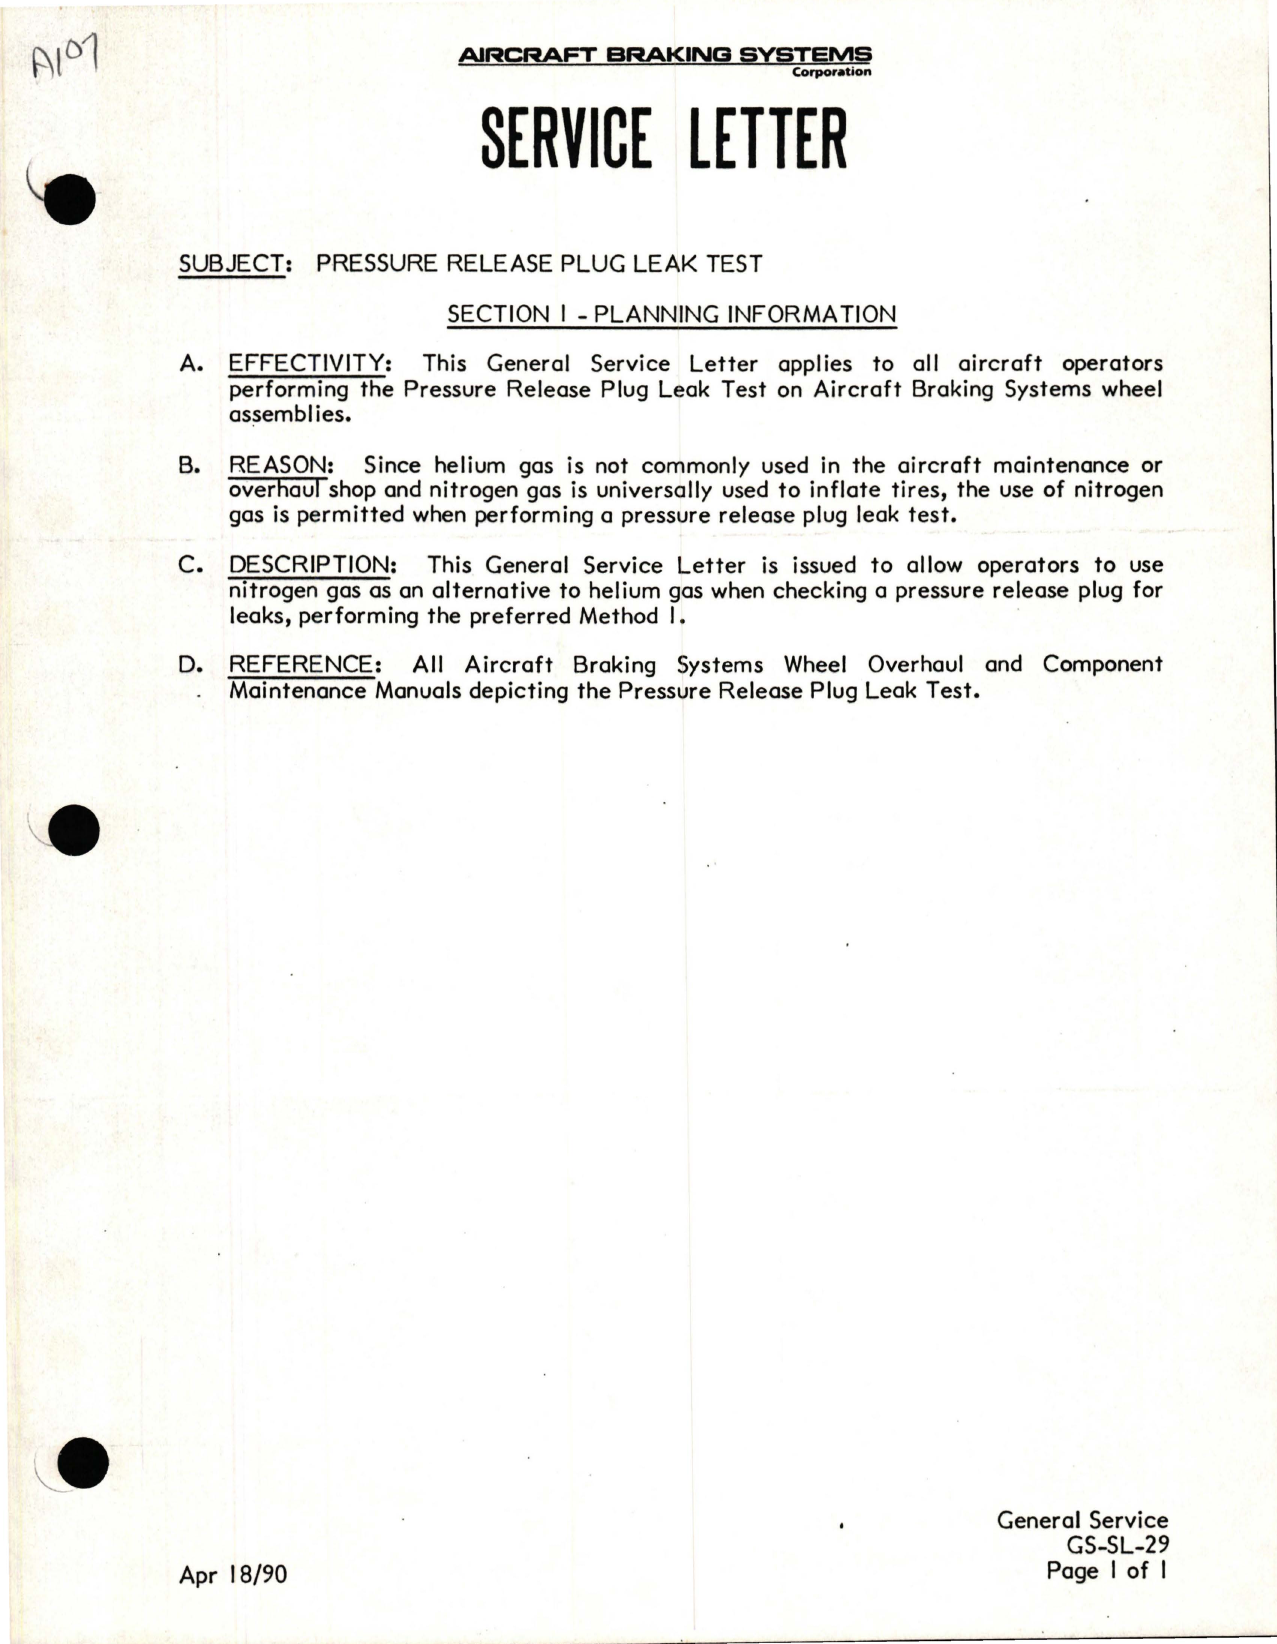 Sample page 1 from AirCorps Library document: Service Letter for Pressure Release Plug Leak Test on Braking Systems Wheel Assemblies